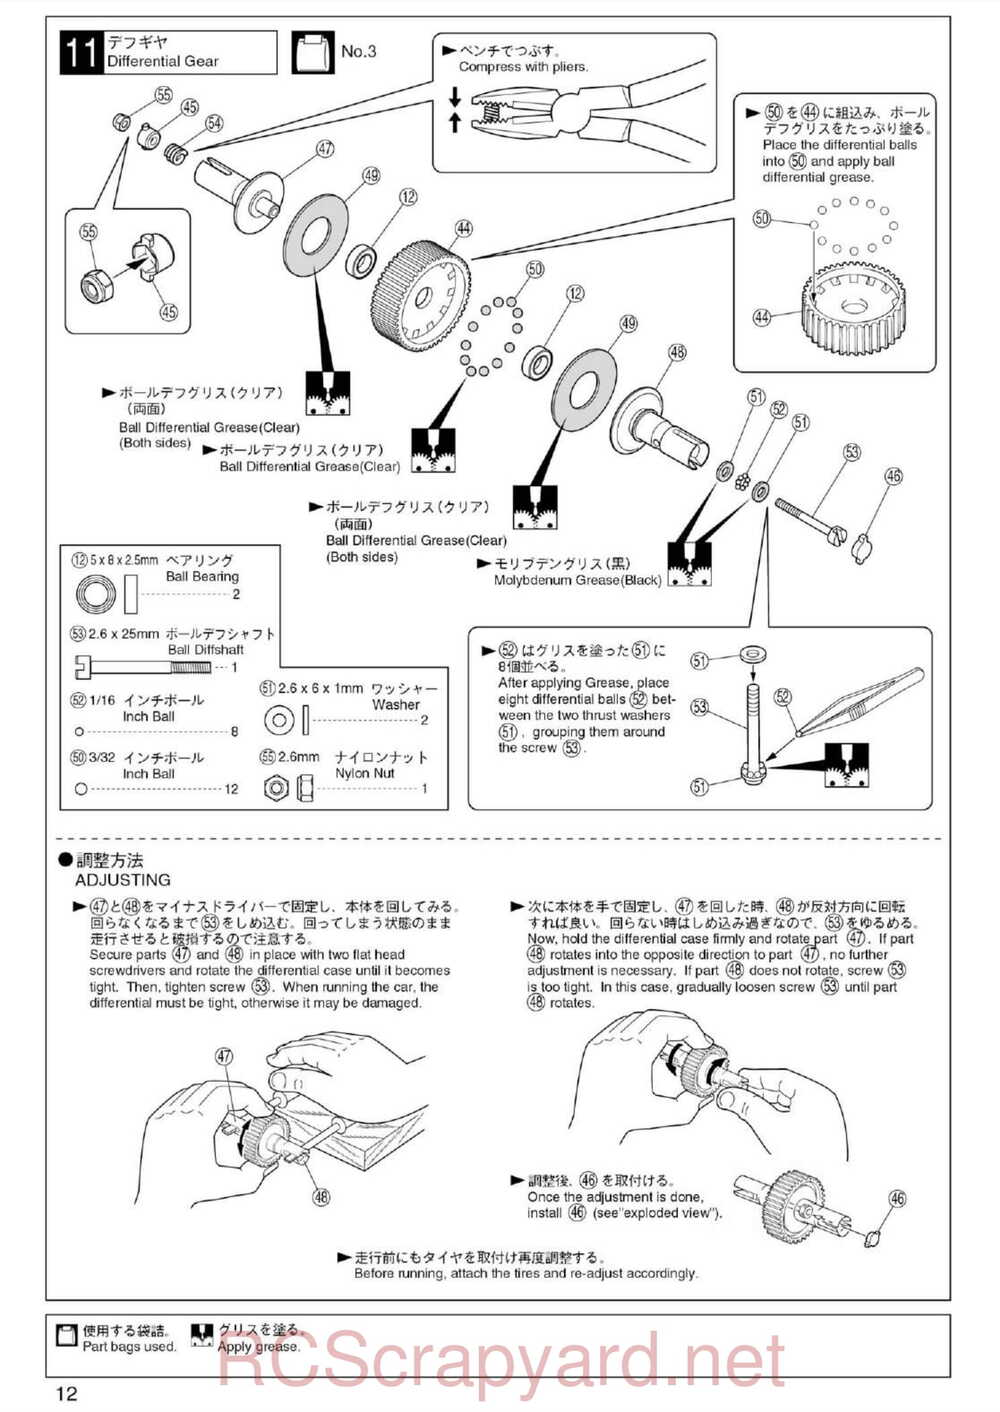 Kyosho - 30074 - Ultima-RB5 - Manual - Page 12